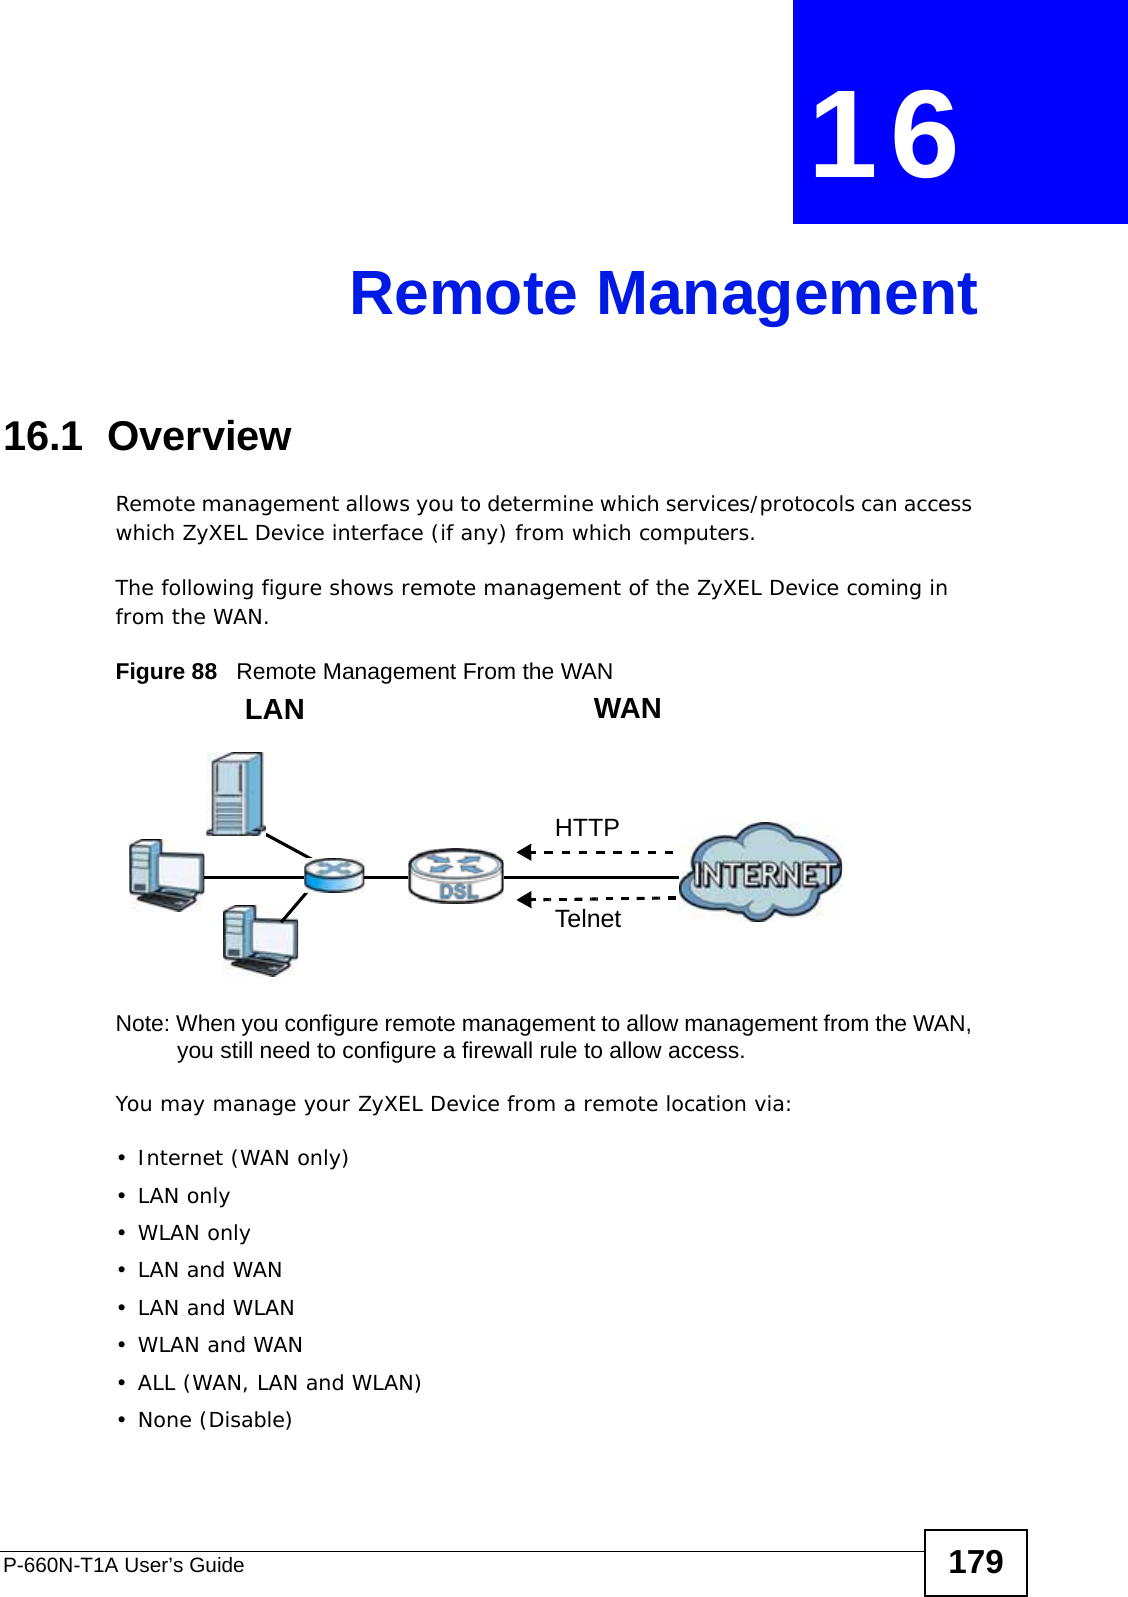 P-660N-T1A User’s Guide 179CHAPTER  16 Remote Management16.1  OverviewRemote management allows you to determine which services/protocols can access which ZyXEL Device interface (if any) from which computers.The following figure shows remote management of the ZyXEL Device coming in from the WAN.Figure 88   Remote Management From the WANNote: When you configure remote management to allow management from the WAN, you still need to configure a firewall rule to allow access.You may manage your ZyXEL Device from a remote location via:•Internet (WAN only)•LAN only•WLAN only•LAN and WAN• LAN and WLAN•WLAN and WAN• ALL (WAN, LAN and WLAN)• None (Disable)LAN WANHTTPTelnet